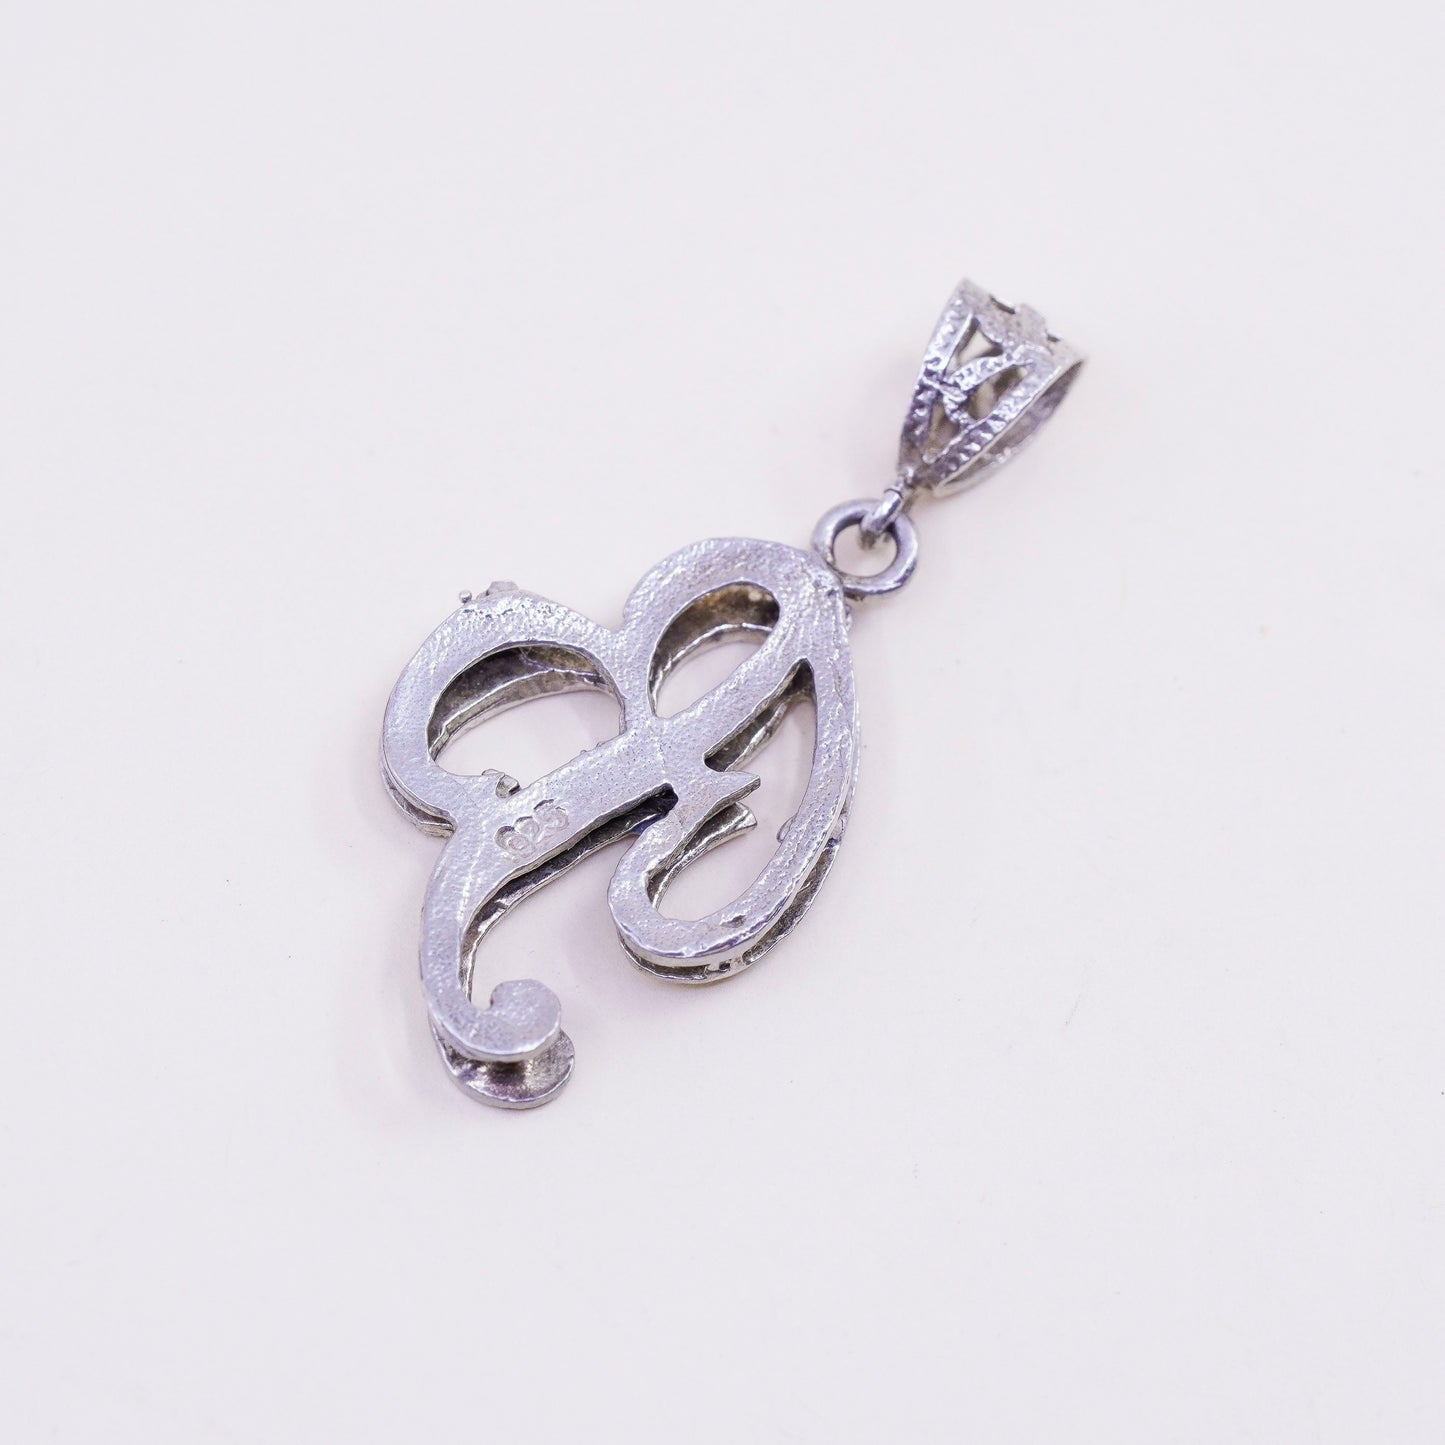 Vintage sterling silver handmade pendant, 925 tag charm with initial “B”